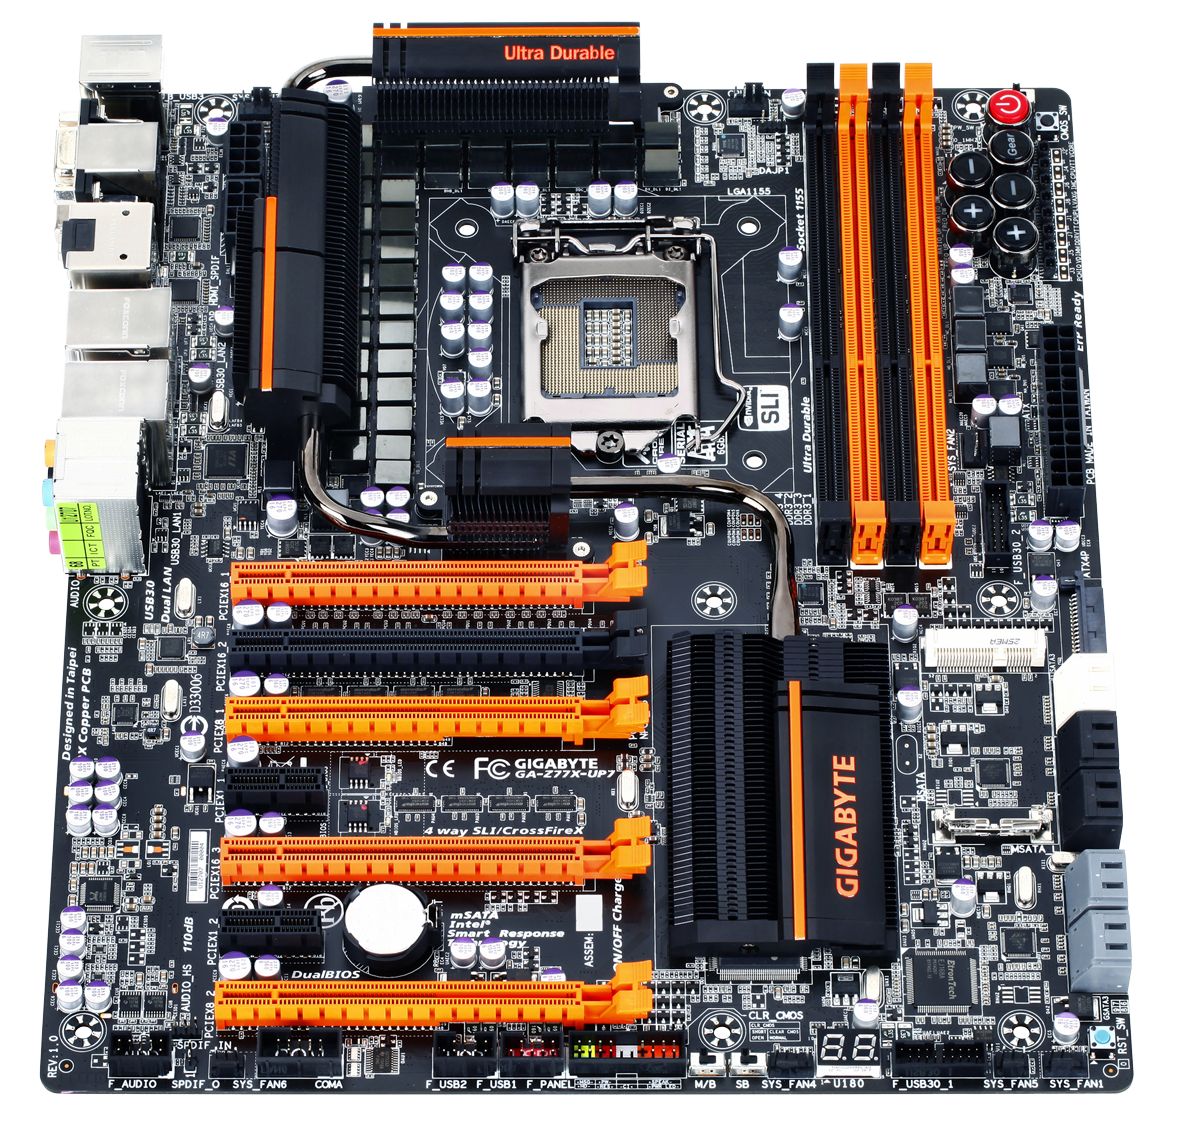 Gigabyte Z77X-UP7 Unleashed: See specs, Price and More